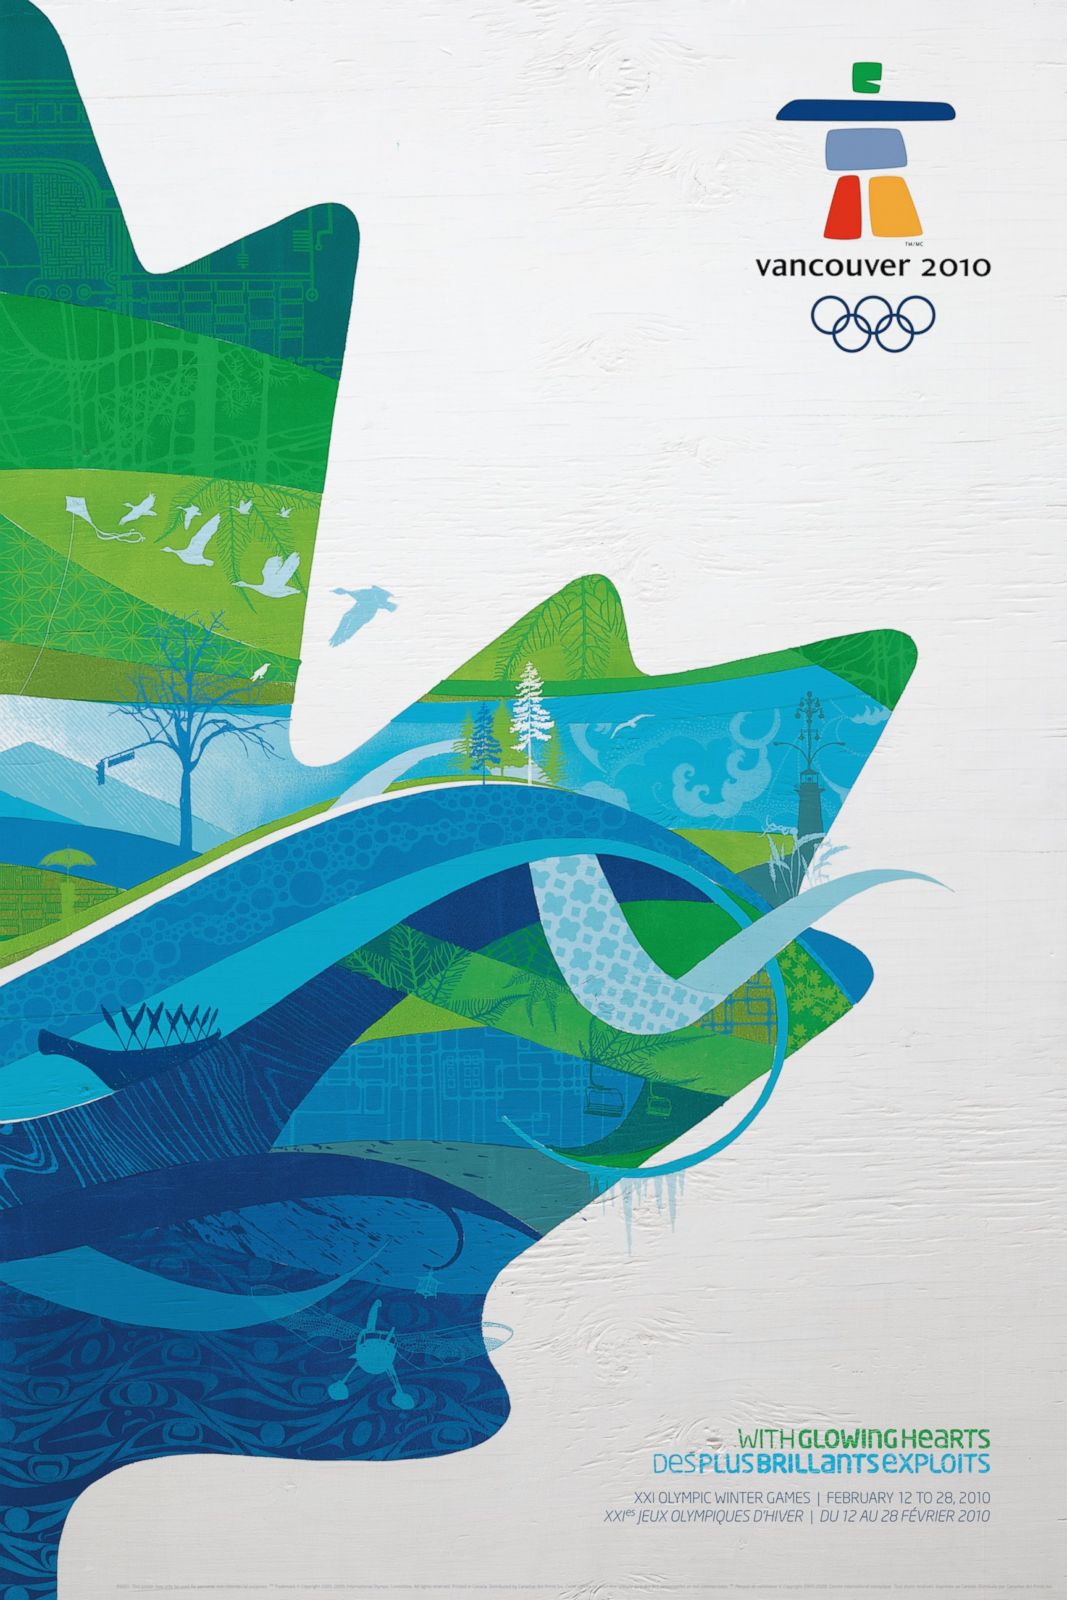 The Games in Graphics A Look Back at the History of Winter Olympic